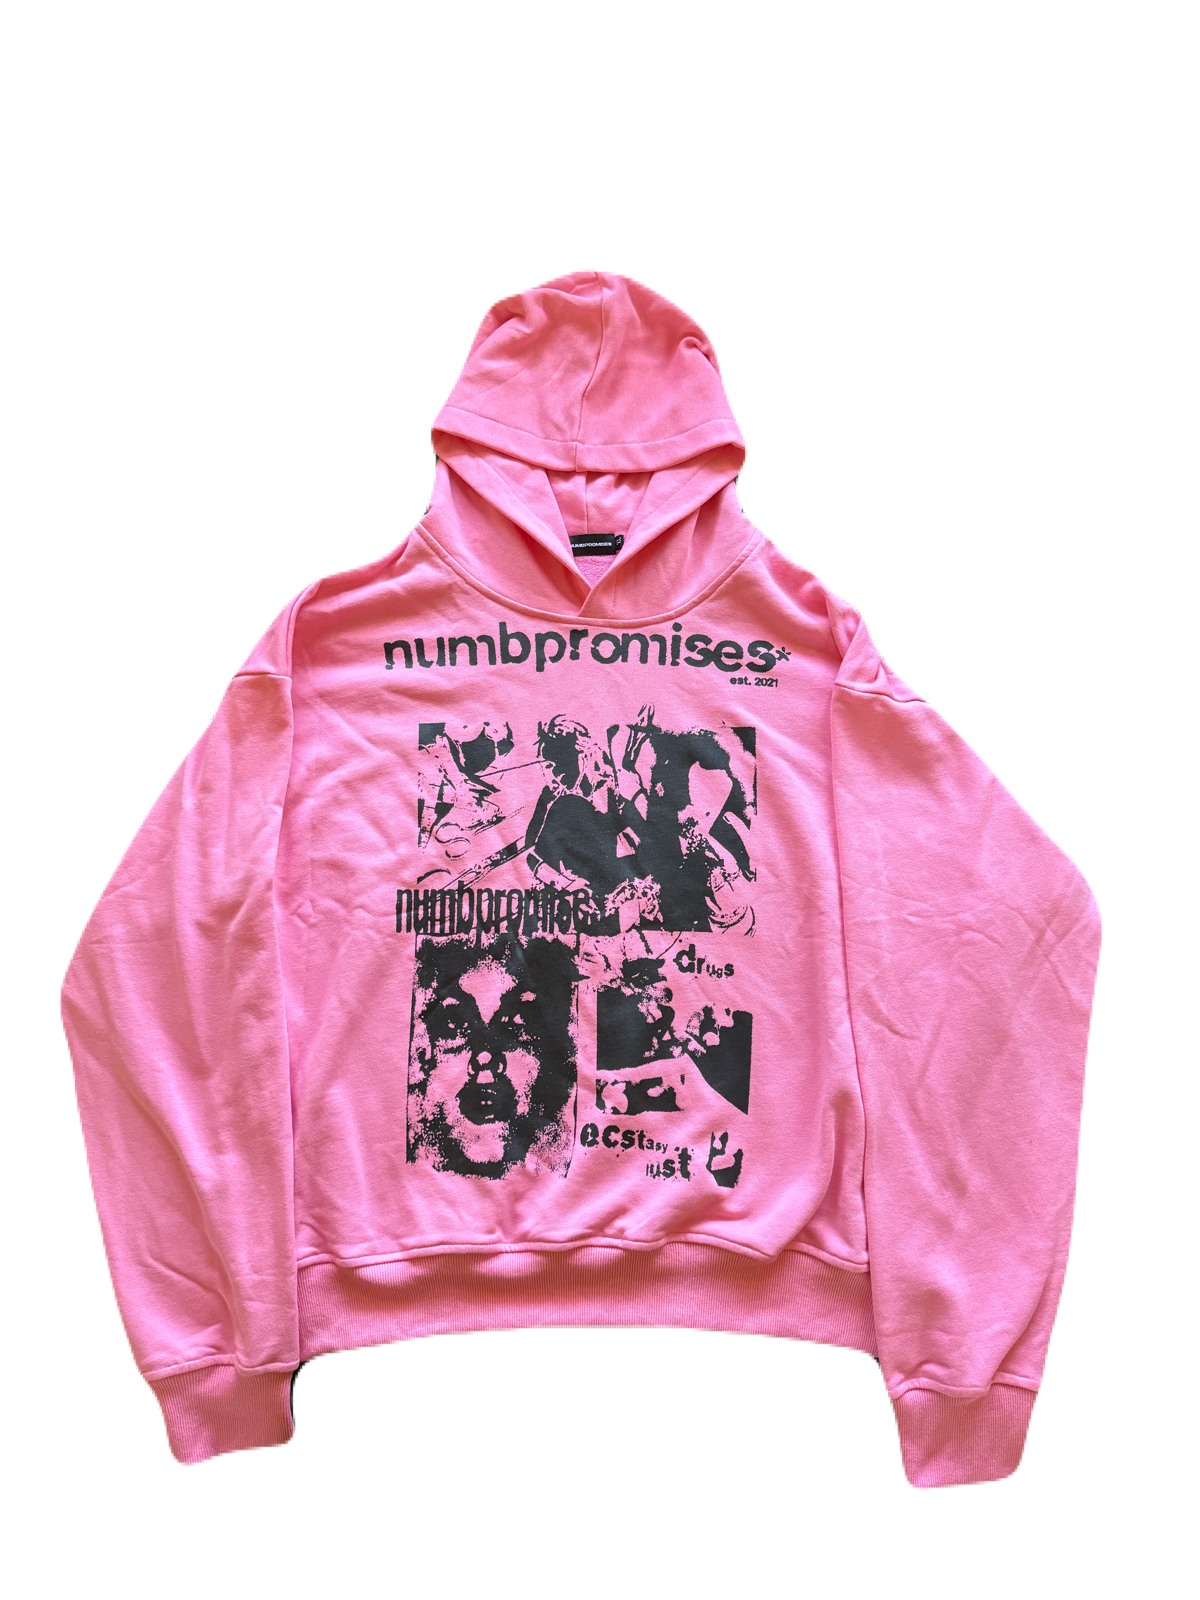 DRUGS, ECSTASY LUST PINK PULLOVER